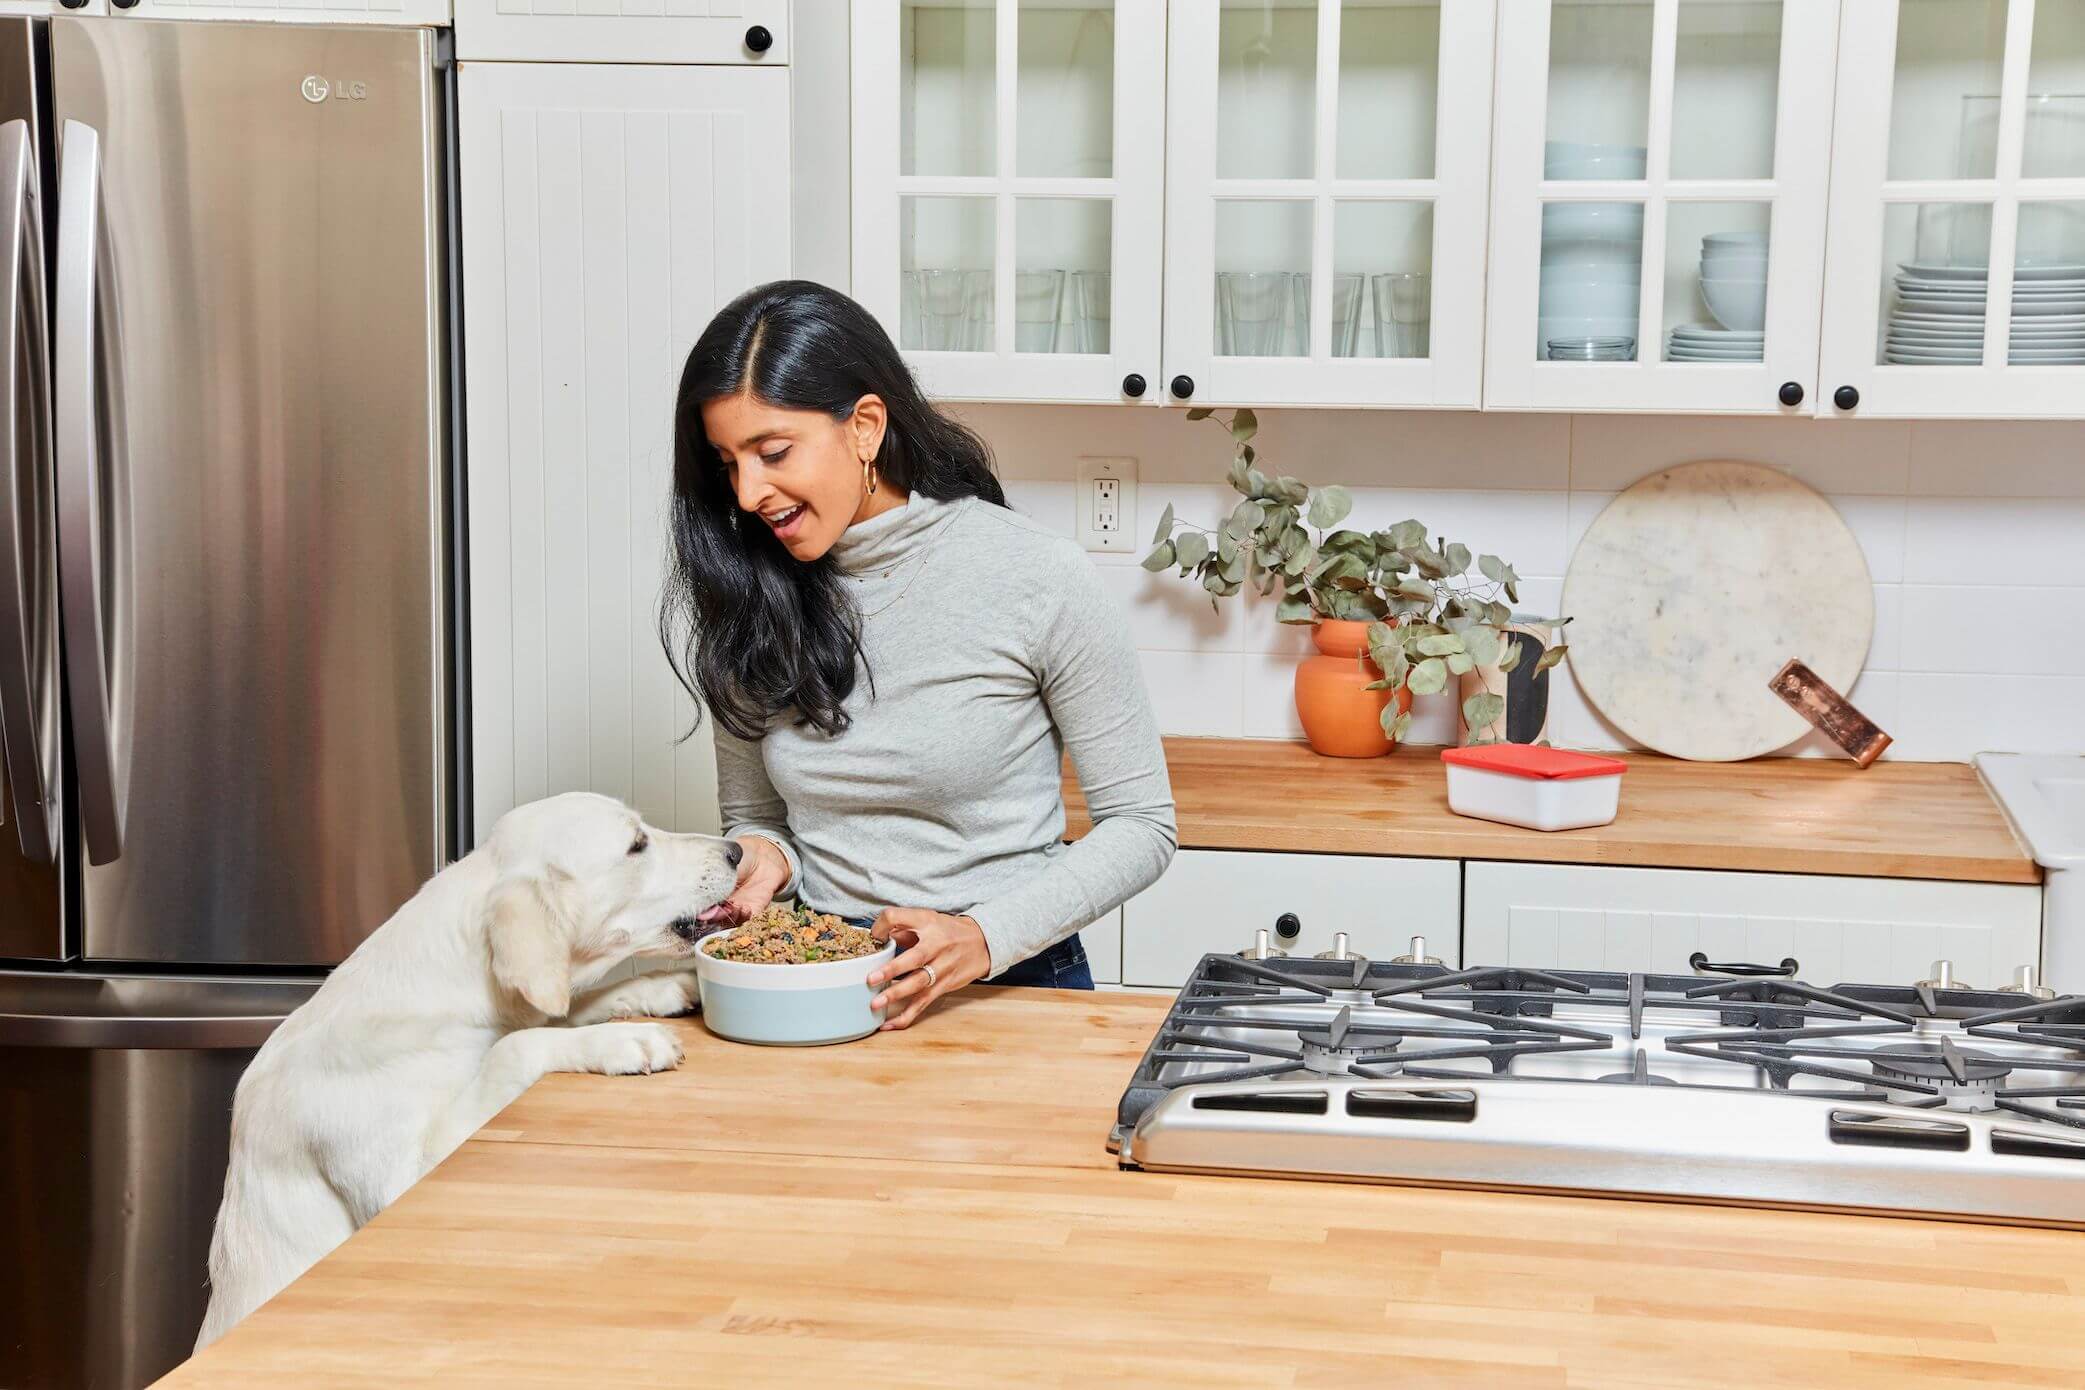 woman-feeds-her-white-dog-from-counter-in-crisp-white-kitchen-1-